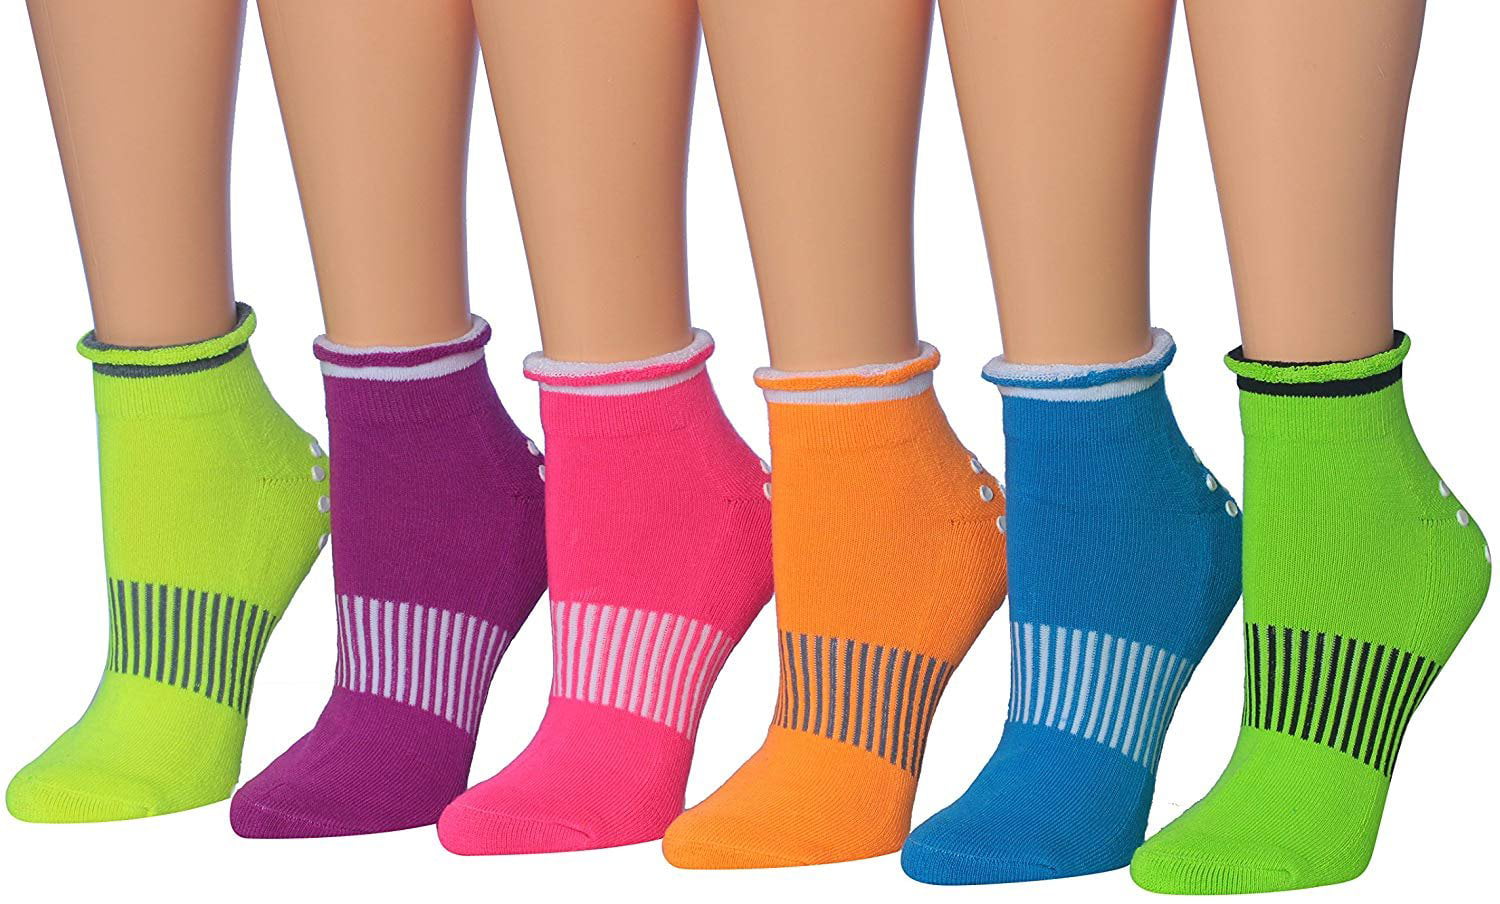 95% Cotton “NEW” Grippers™ Pilates & Yoga Socks All Grip and Non-Slip Quality 